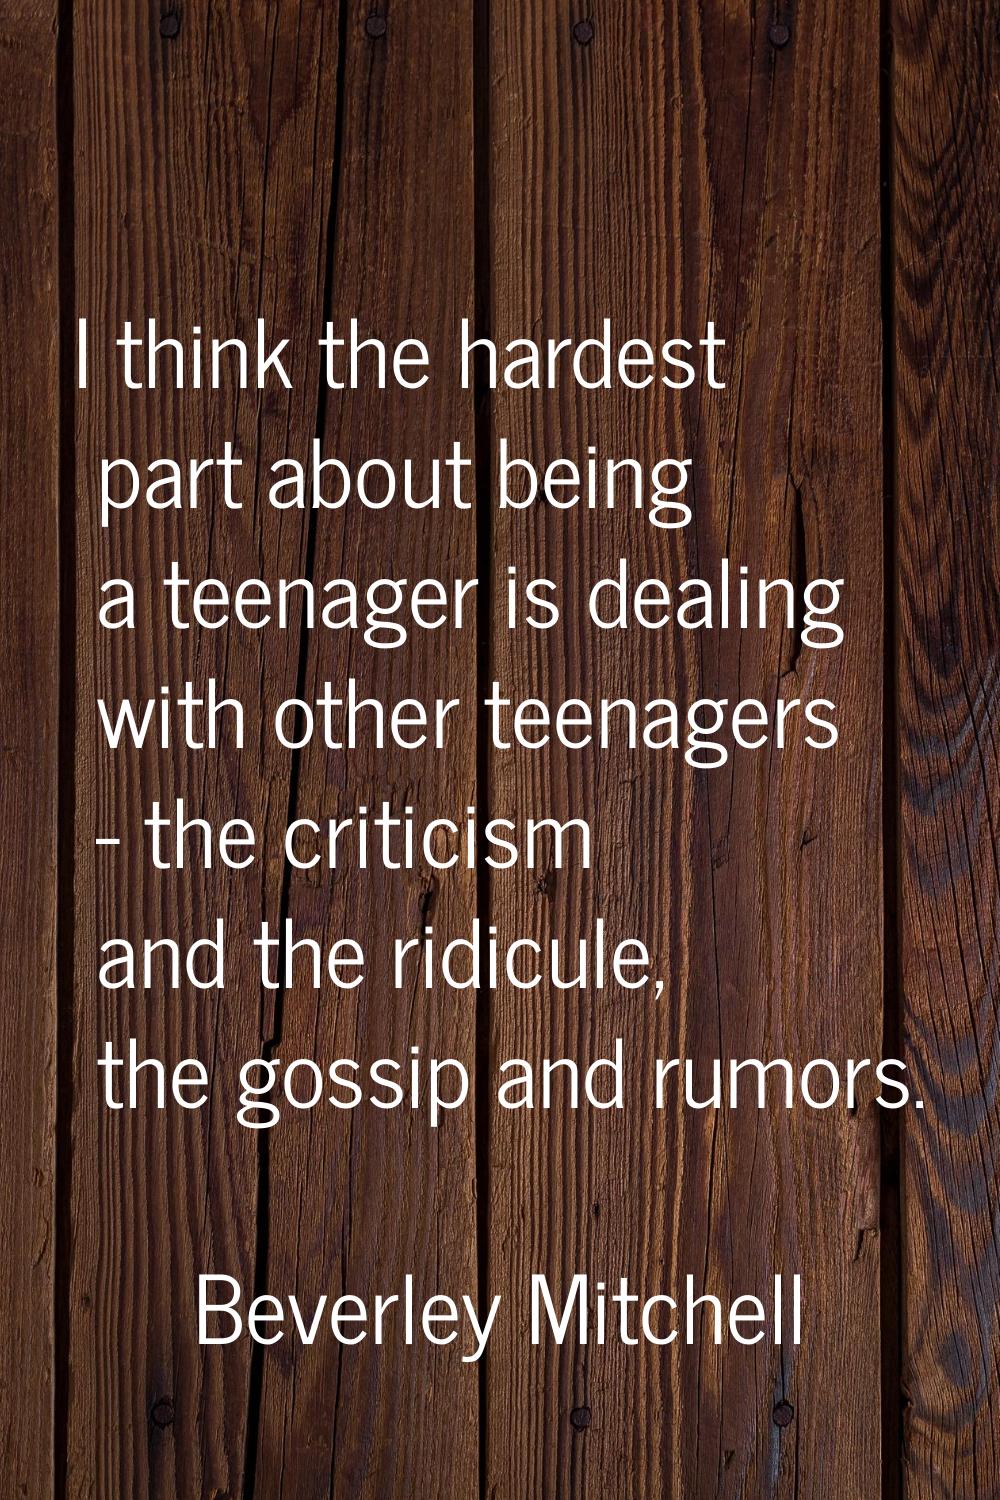 I think the hardest part about being a teenager is dealing with other teenagers - the criticism and